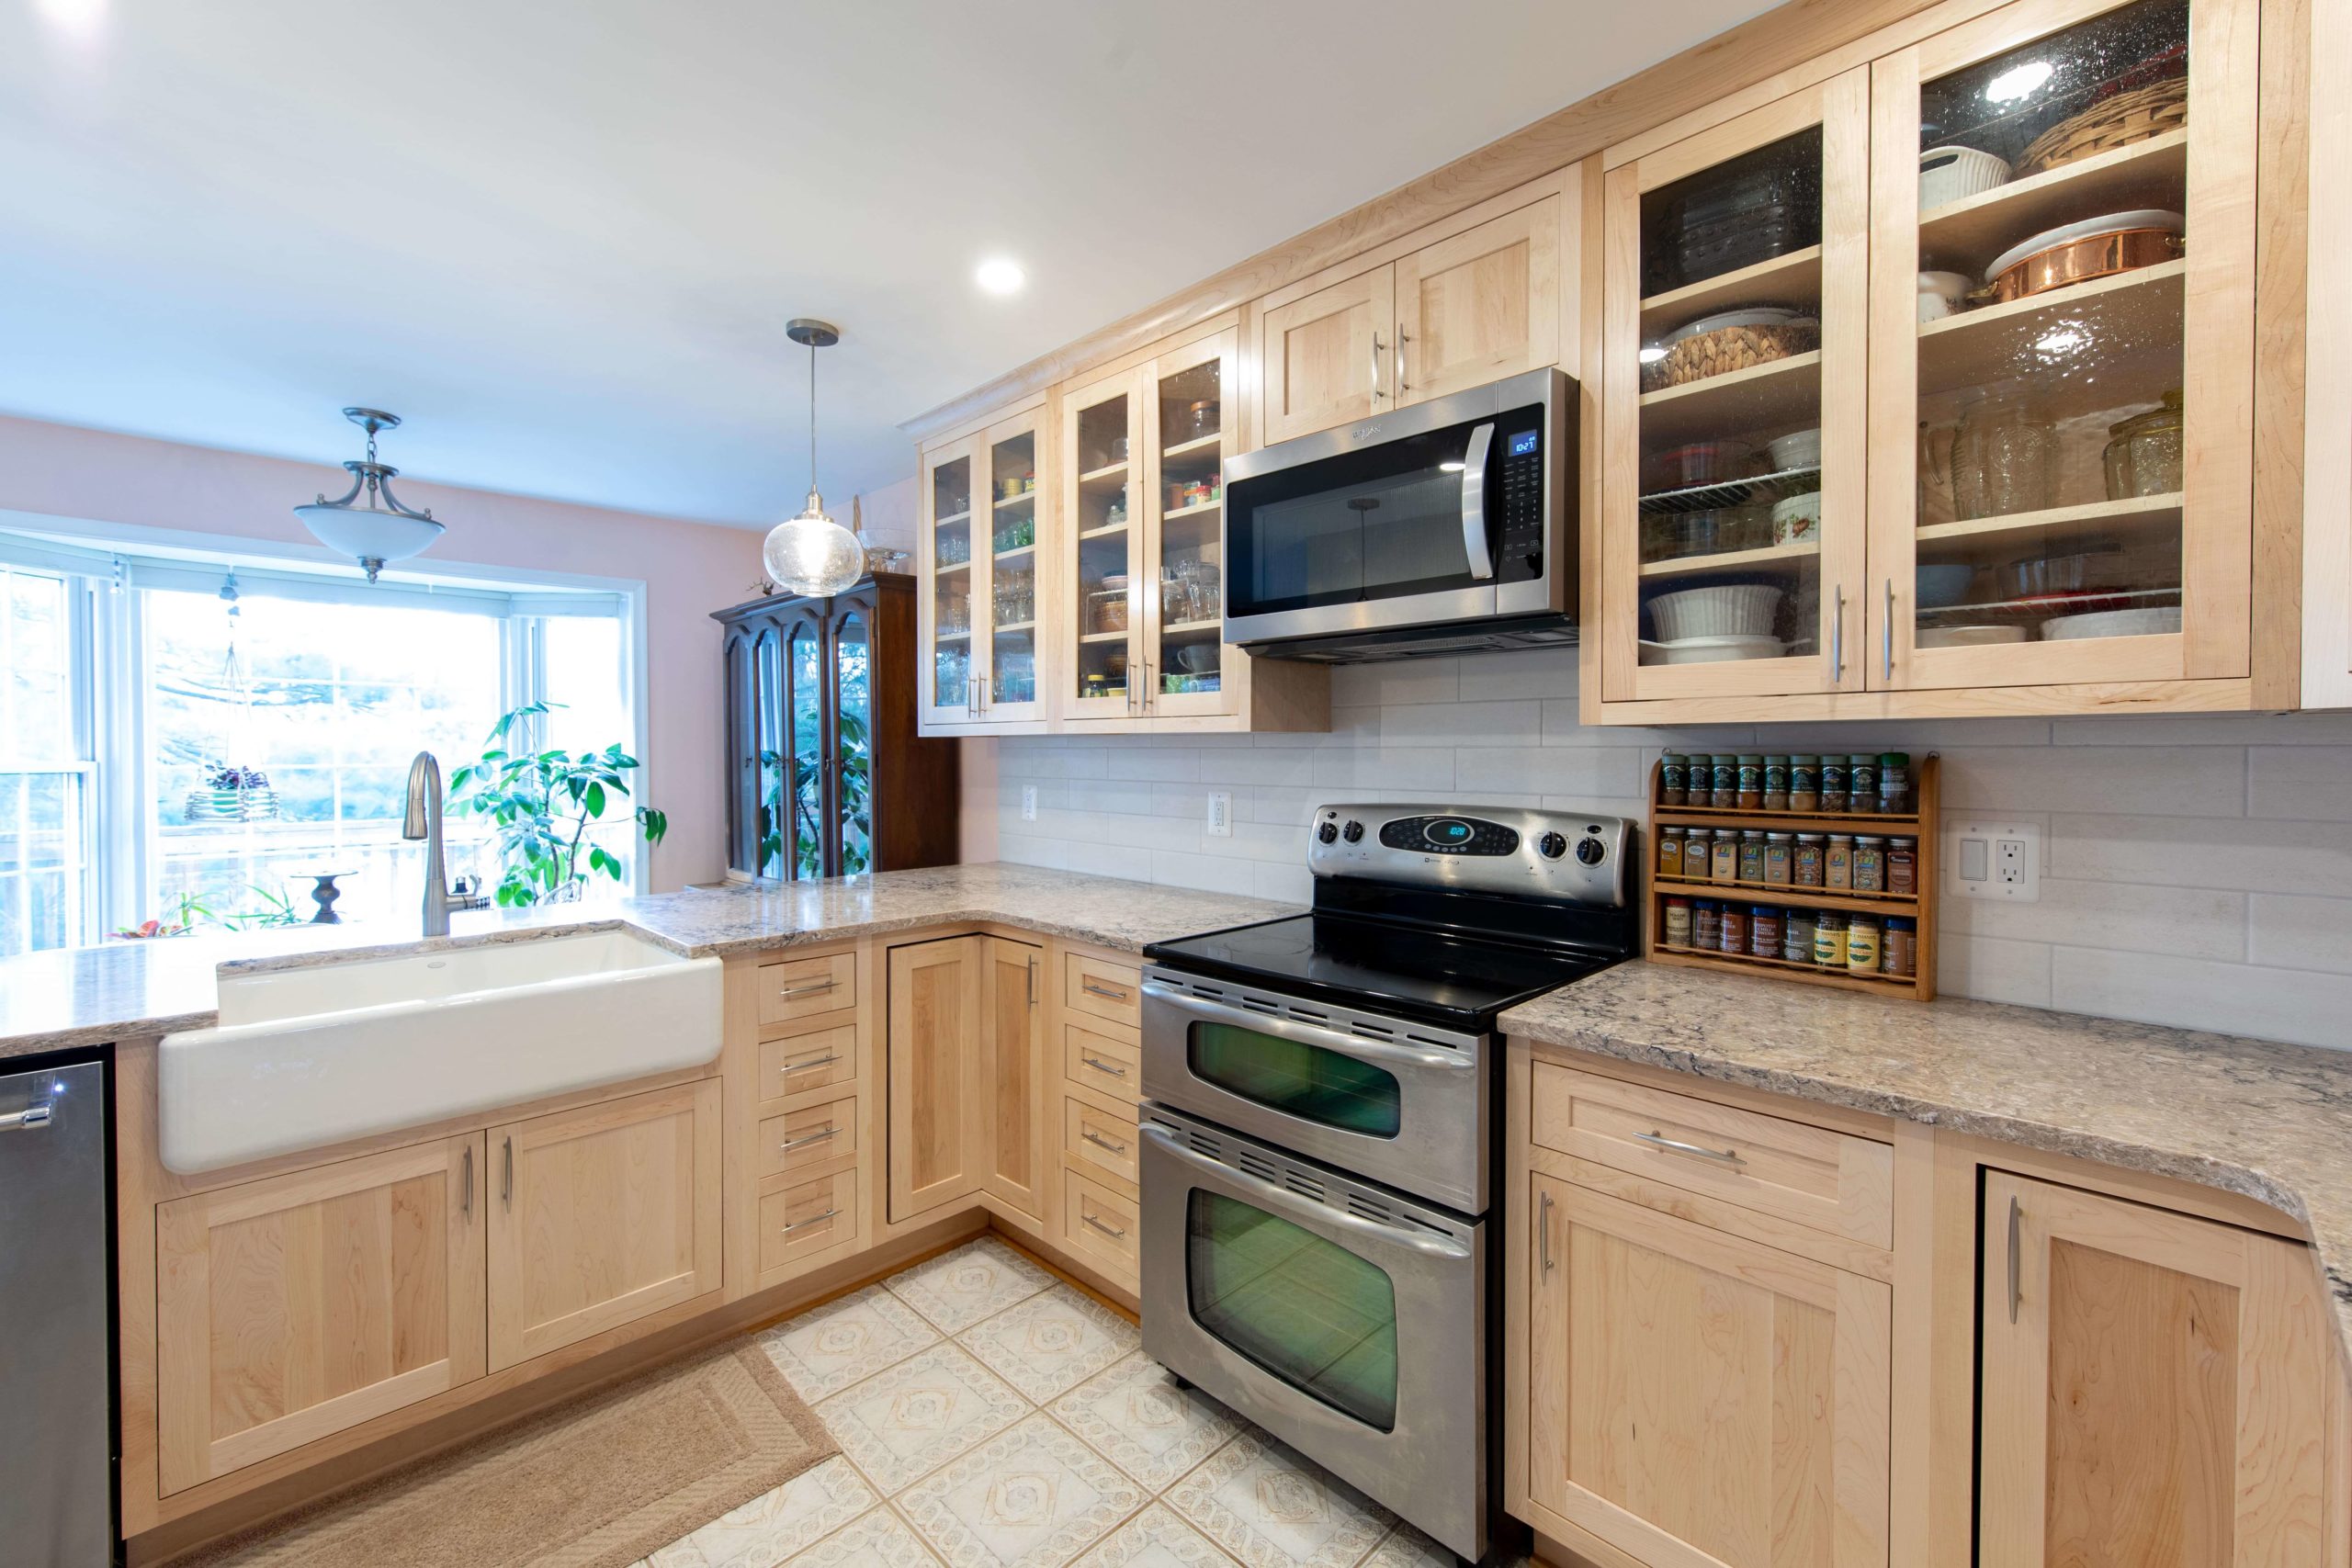 a kitchen with wooden cabinets and stainless steel appliances